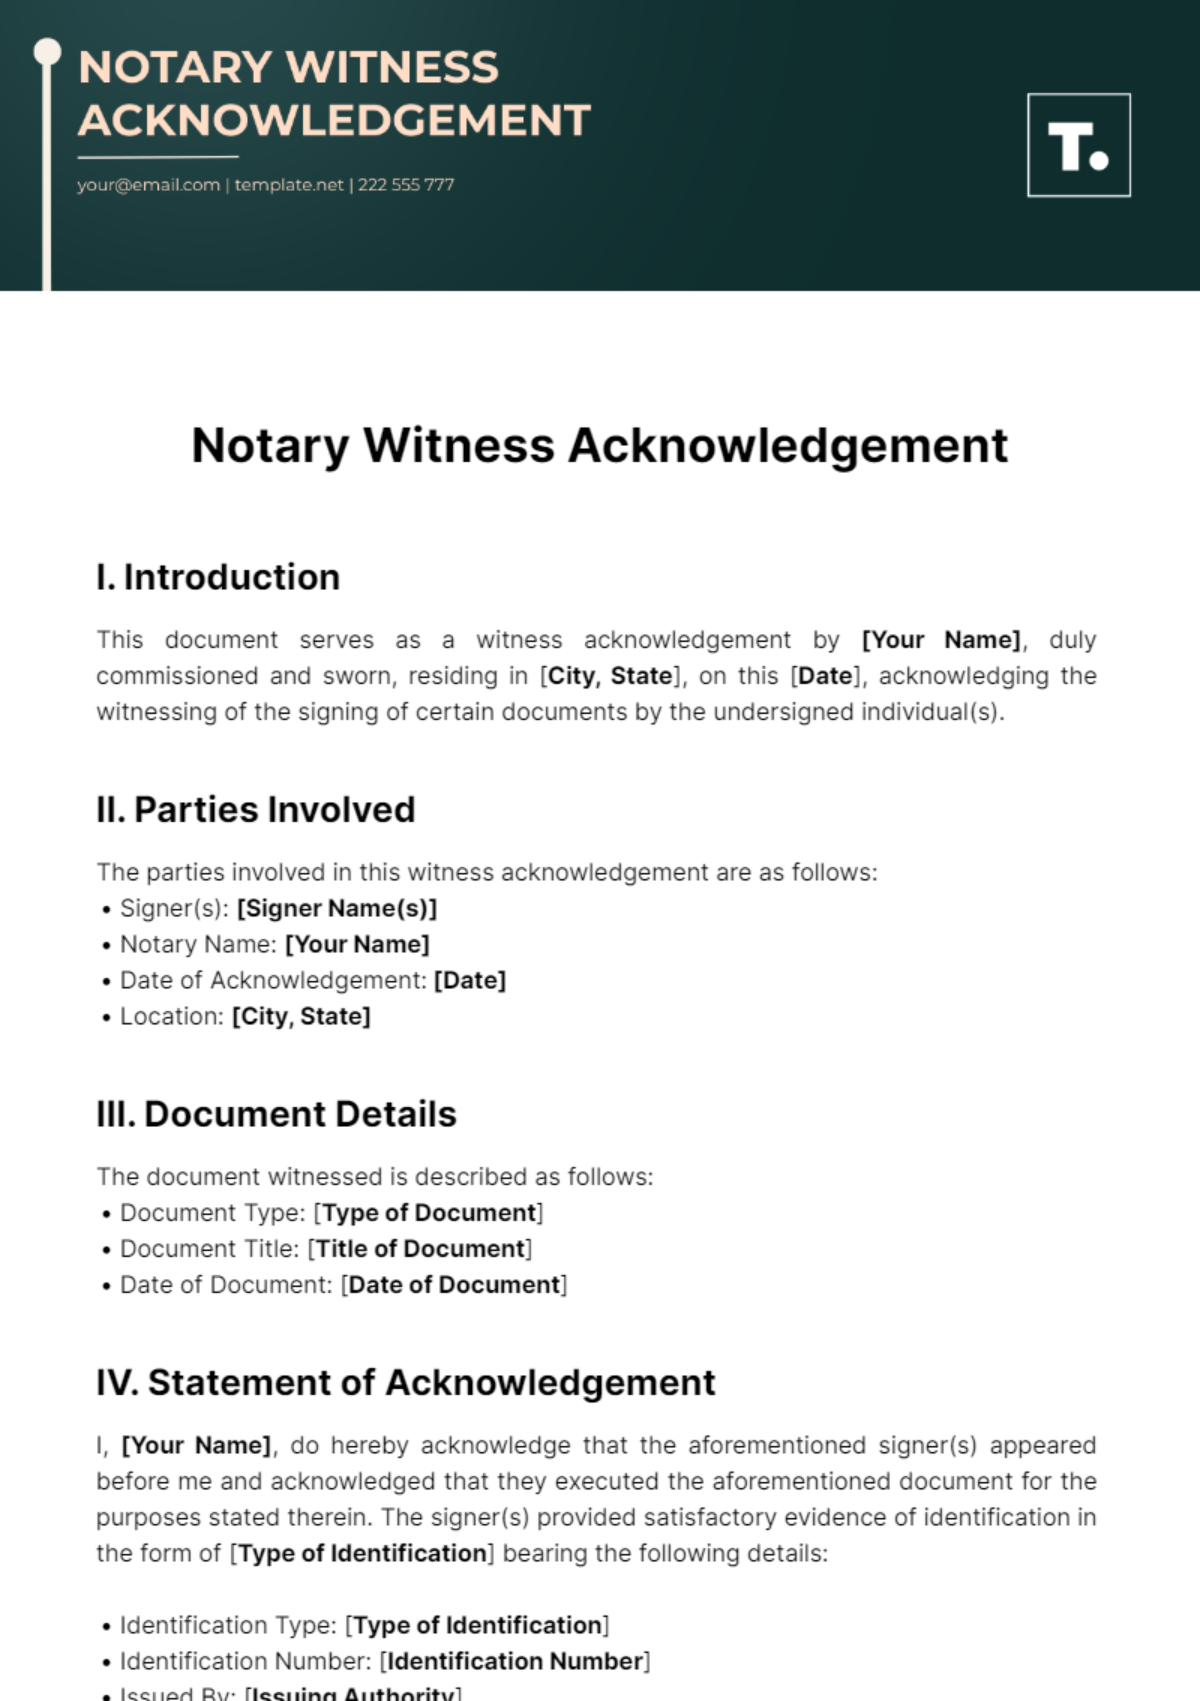 Notary Witness Acknowledgement Template